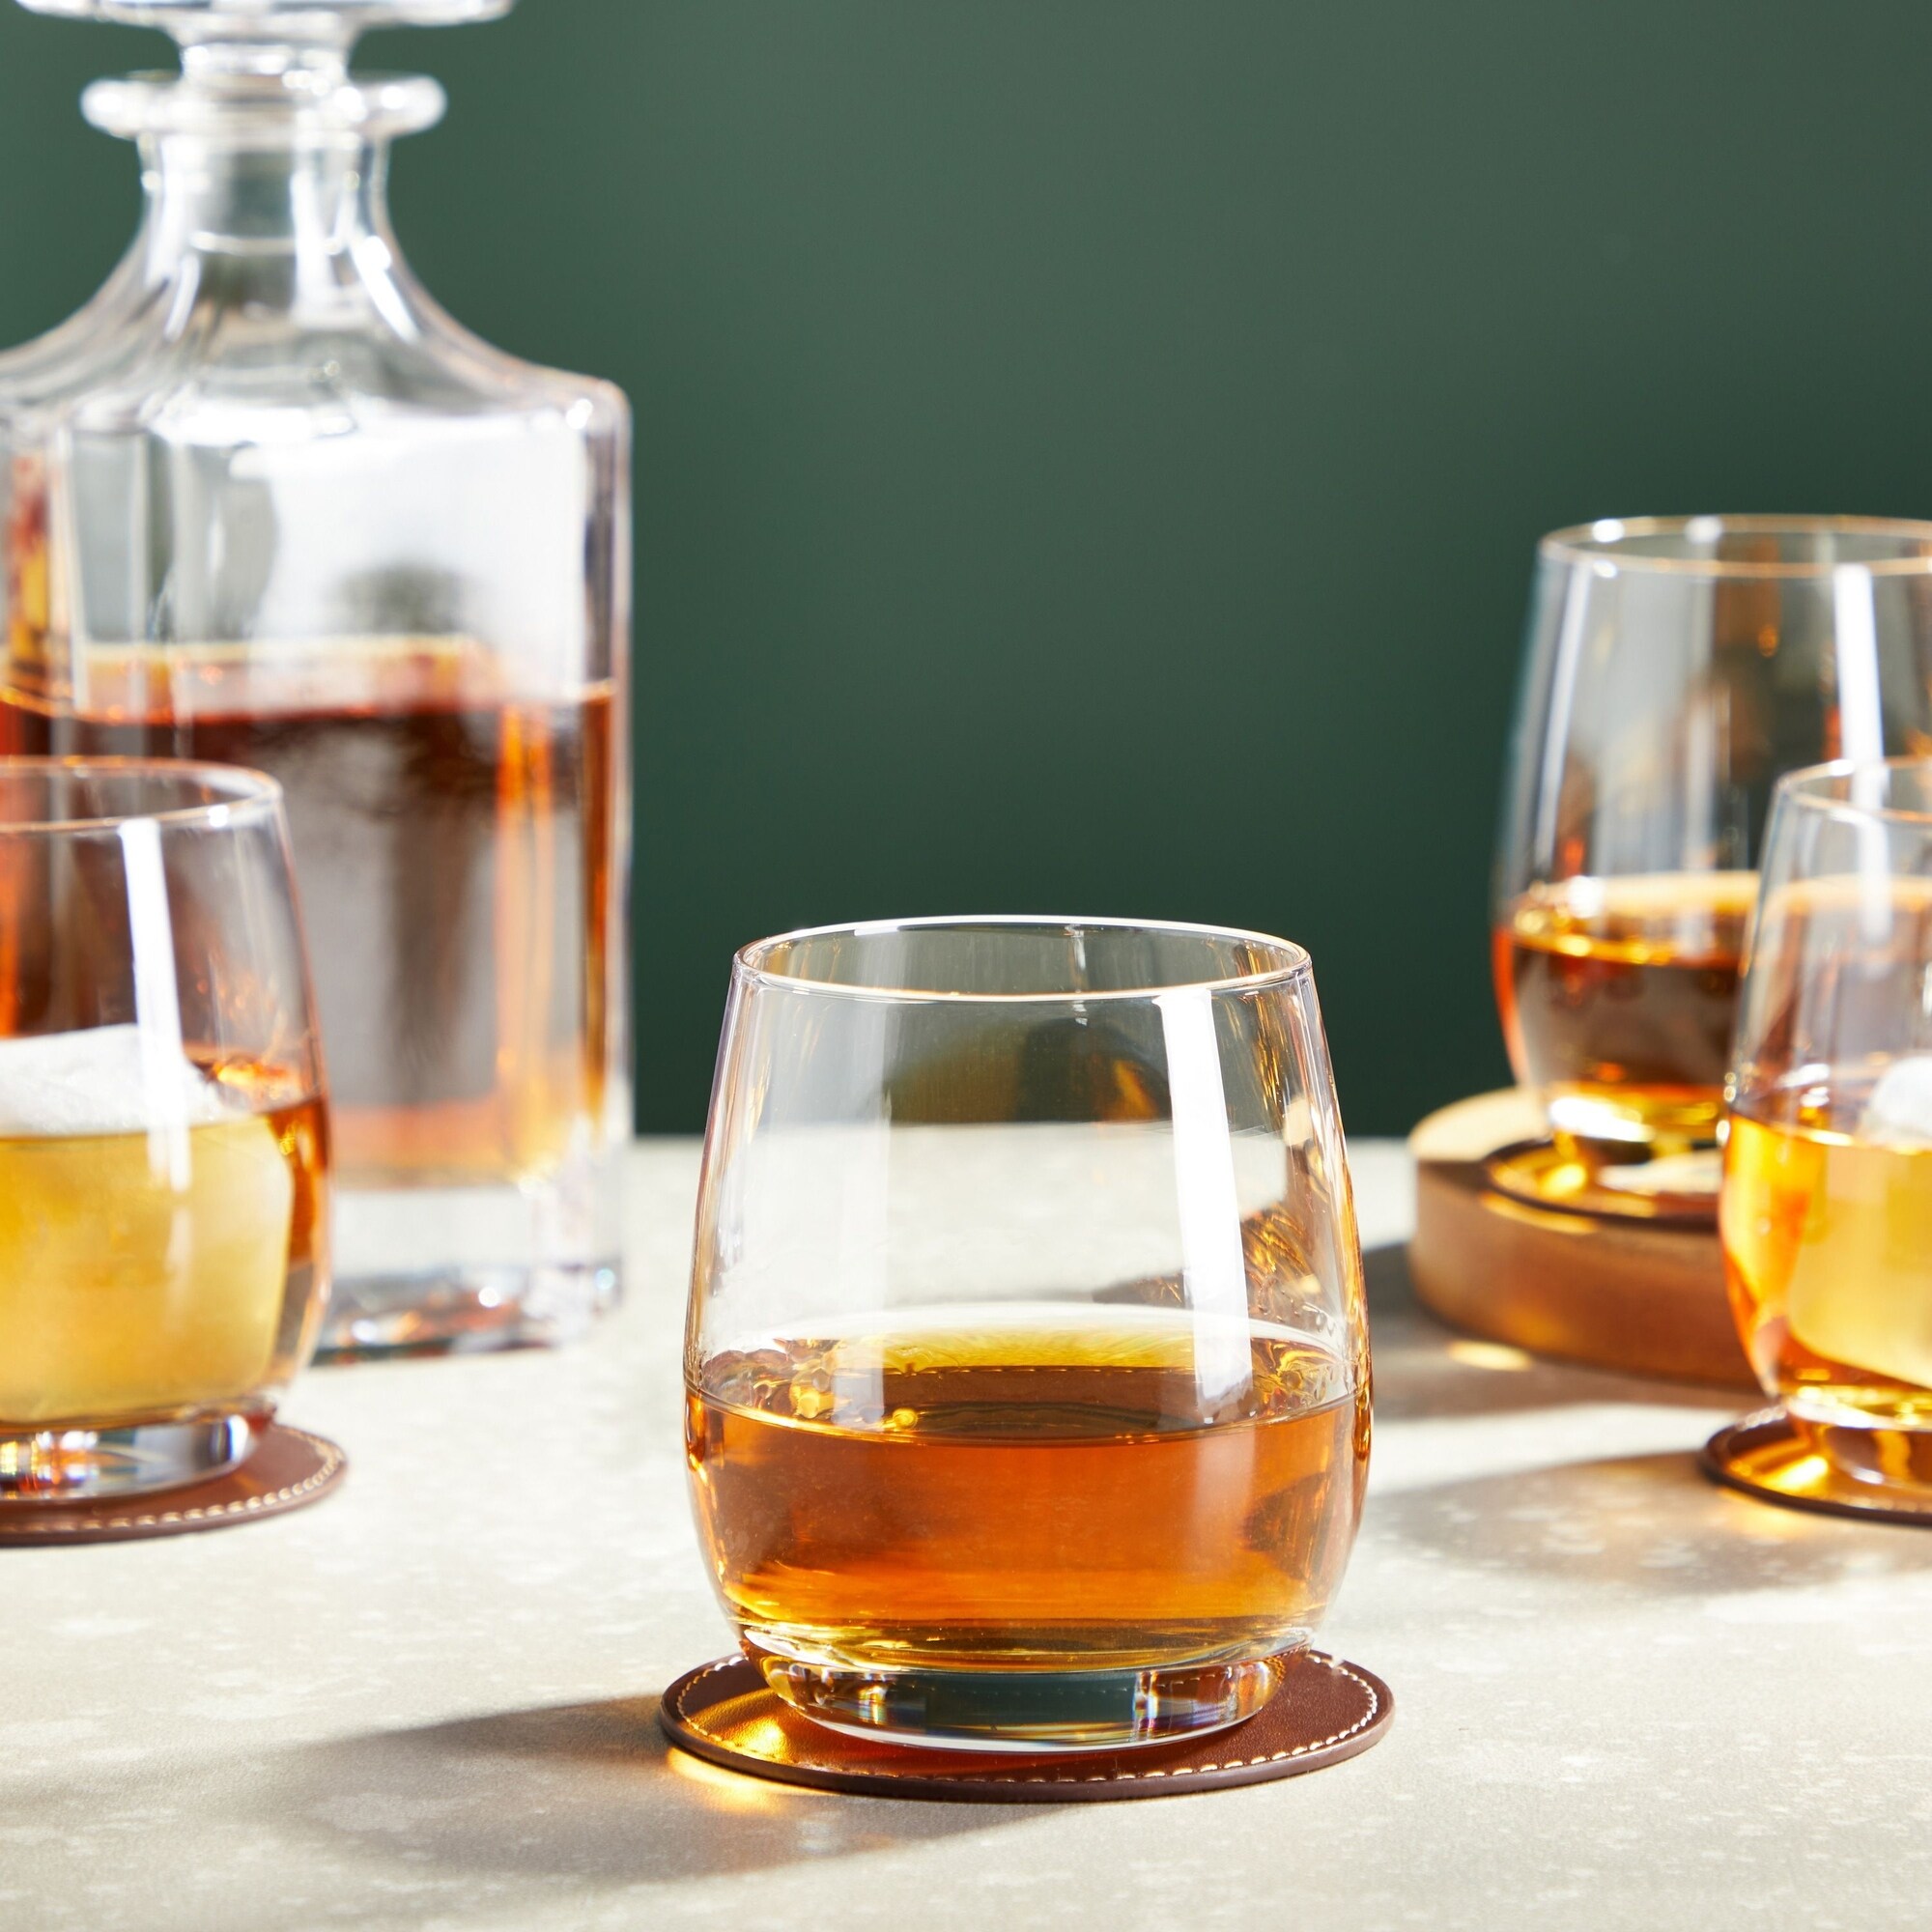 https://ak1.ostkcdn.com/images/products/is/images/direct/75ff203ea5472132ed05e9cea1945aea1bf97645/12oz-Whiskey-Glasses%2C-Double-Old-Fashioned-Glasses-for-Scotch%2C-Bourbon%2C-Cocktails-%28Set-of-6%29.jpg